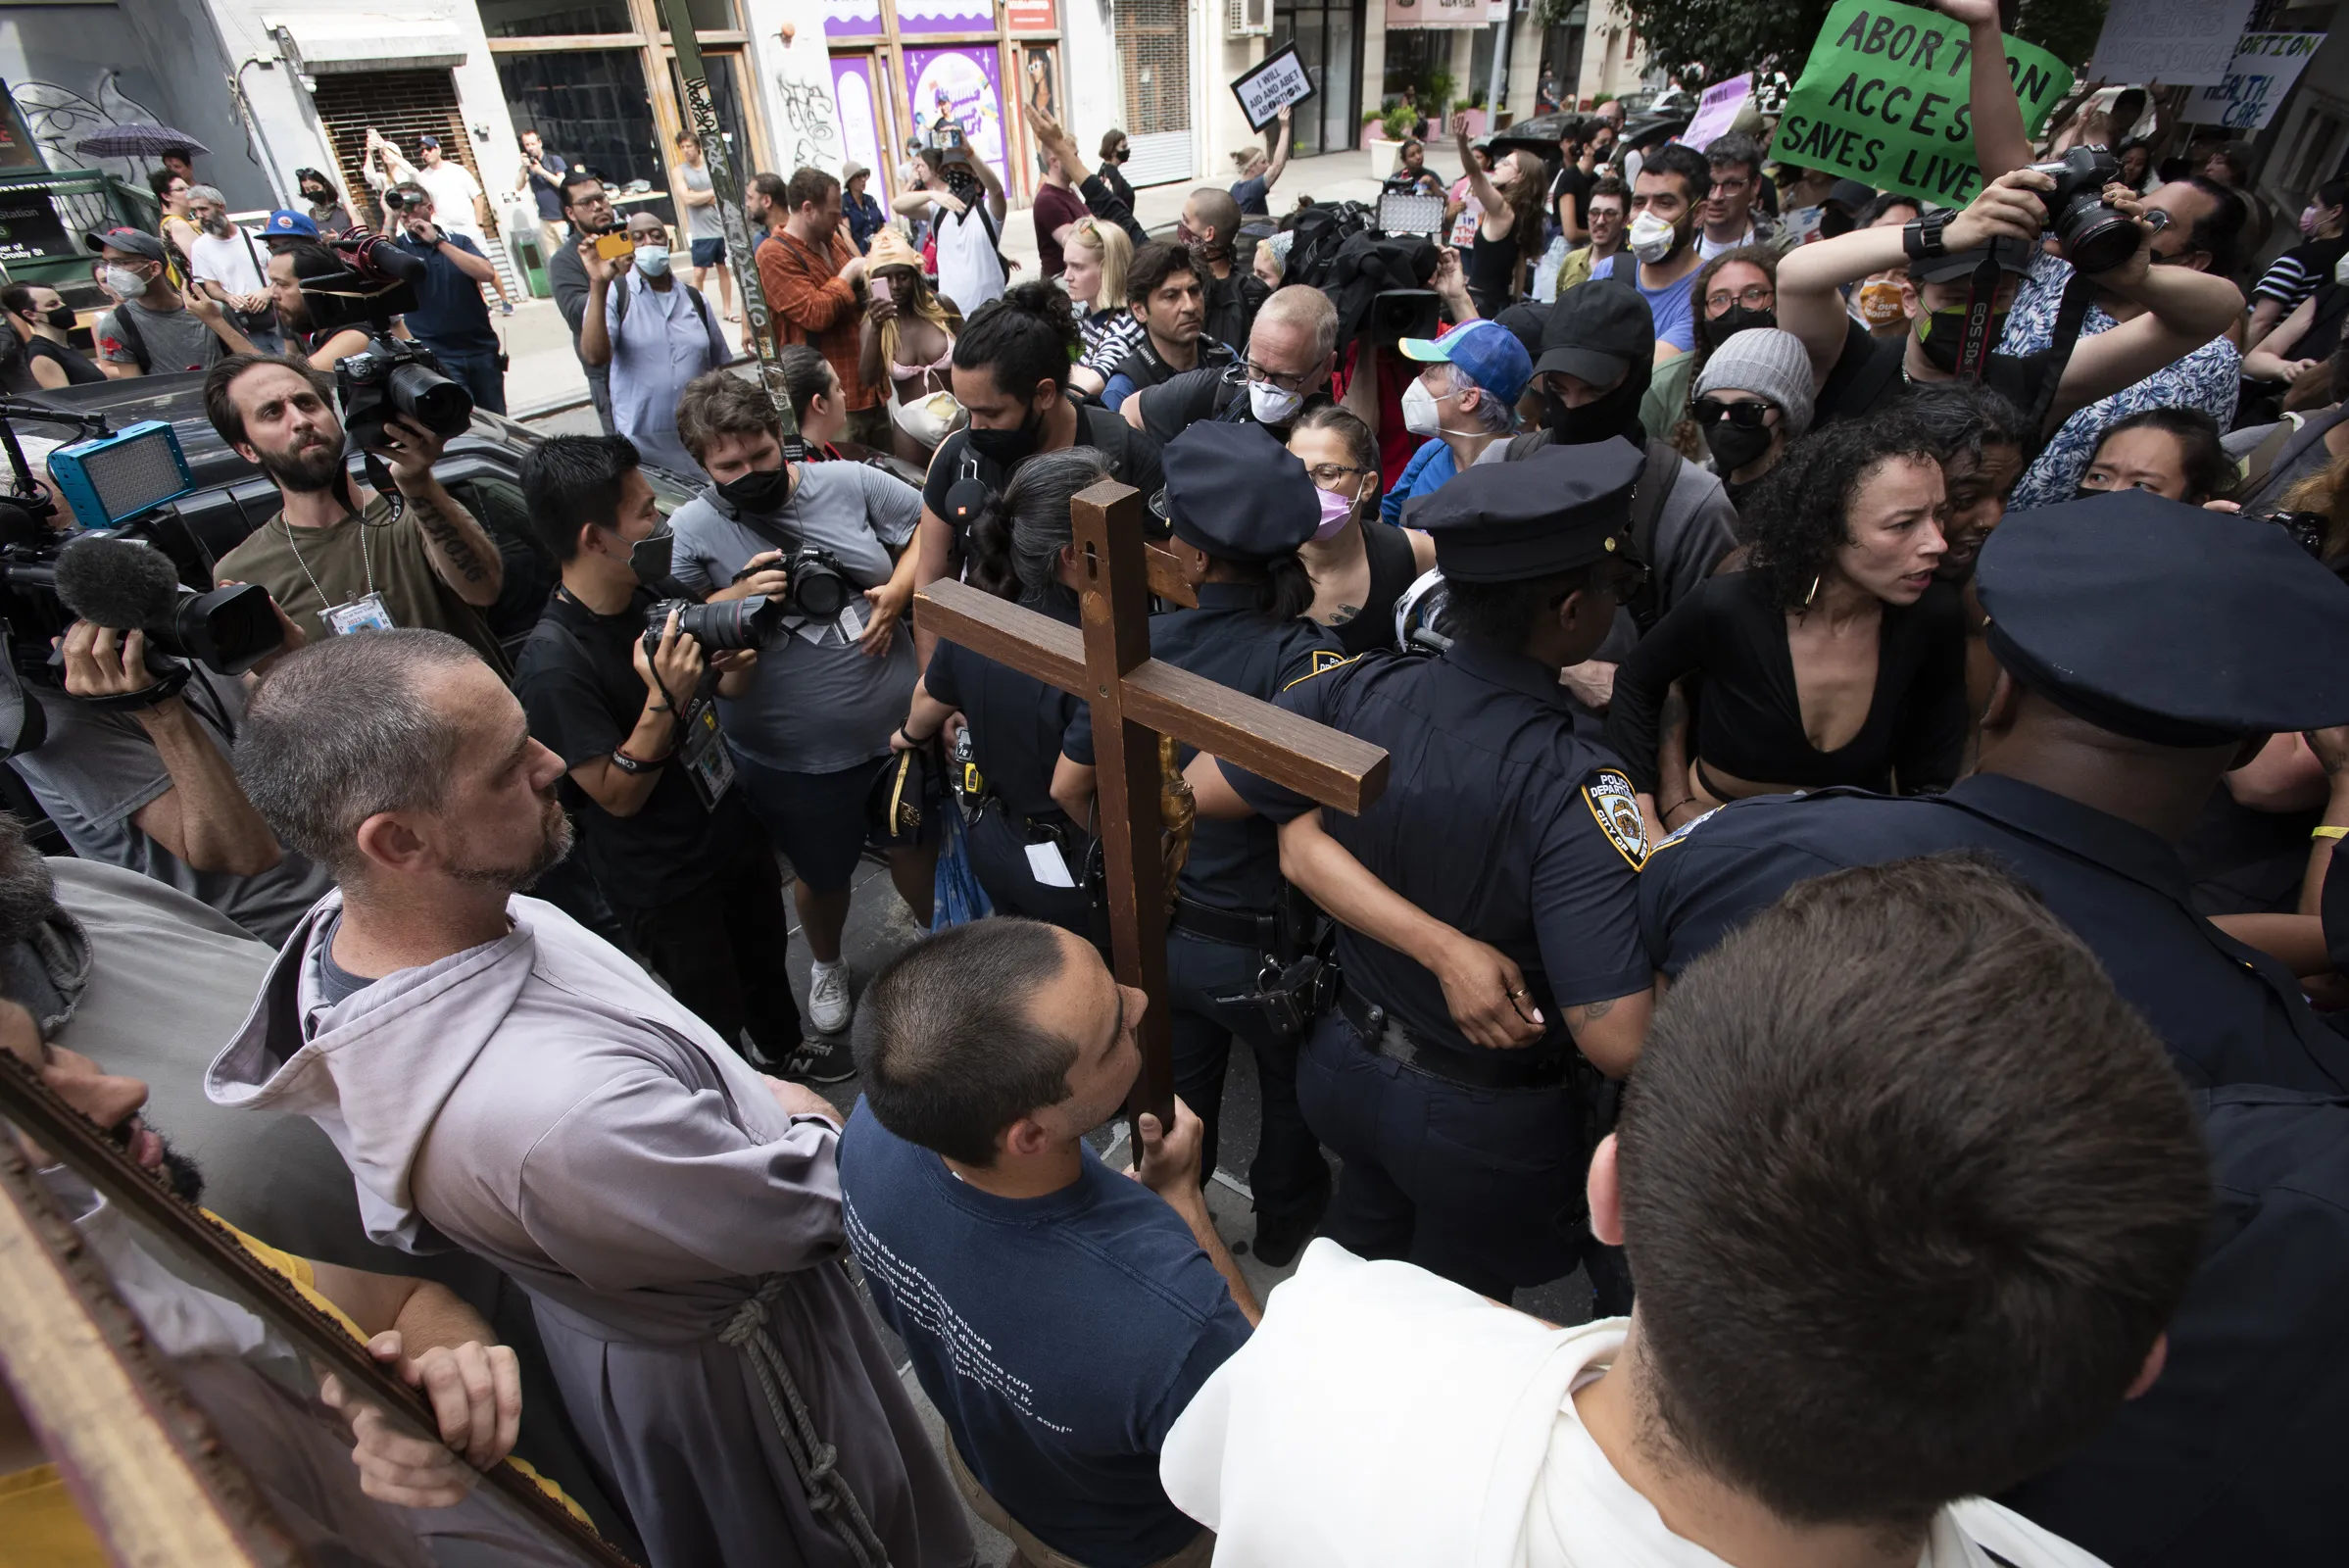 Father Fidelis Moscinski (lower left, standing behind the cross), a well-known pro-life activist and priest of the Franciscan Friars of the Renewal (CFR) is seen during a tense standoff between pro-life and pro-abortion demonstrators in Lower Manhattan on July 2, 2022. The pro-life marchers were trying to reach a Planned Parenthood abortion clinic where they planned to hold a prayer vigil, and the pro-abortion demonstrators were trying to block their path.?w=200&h=150